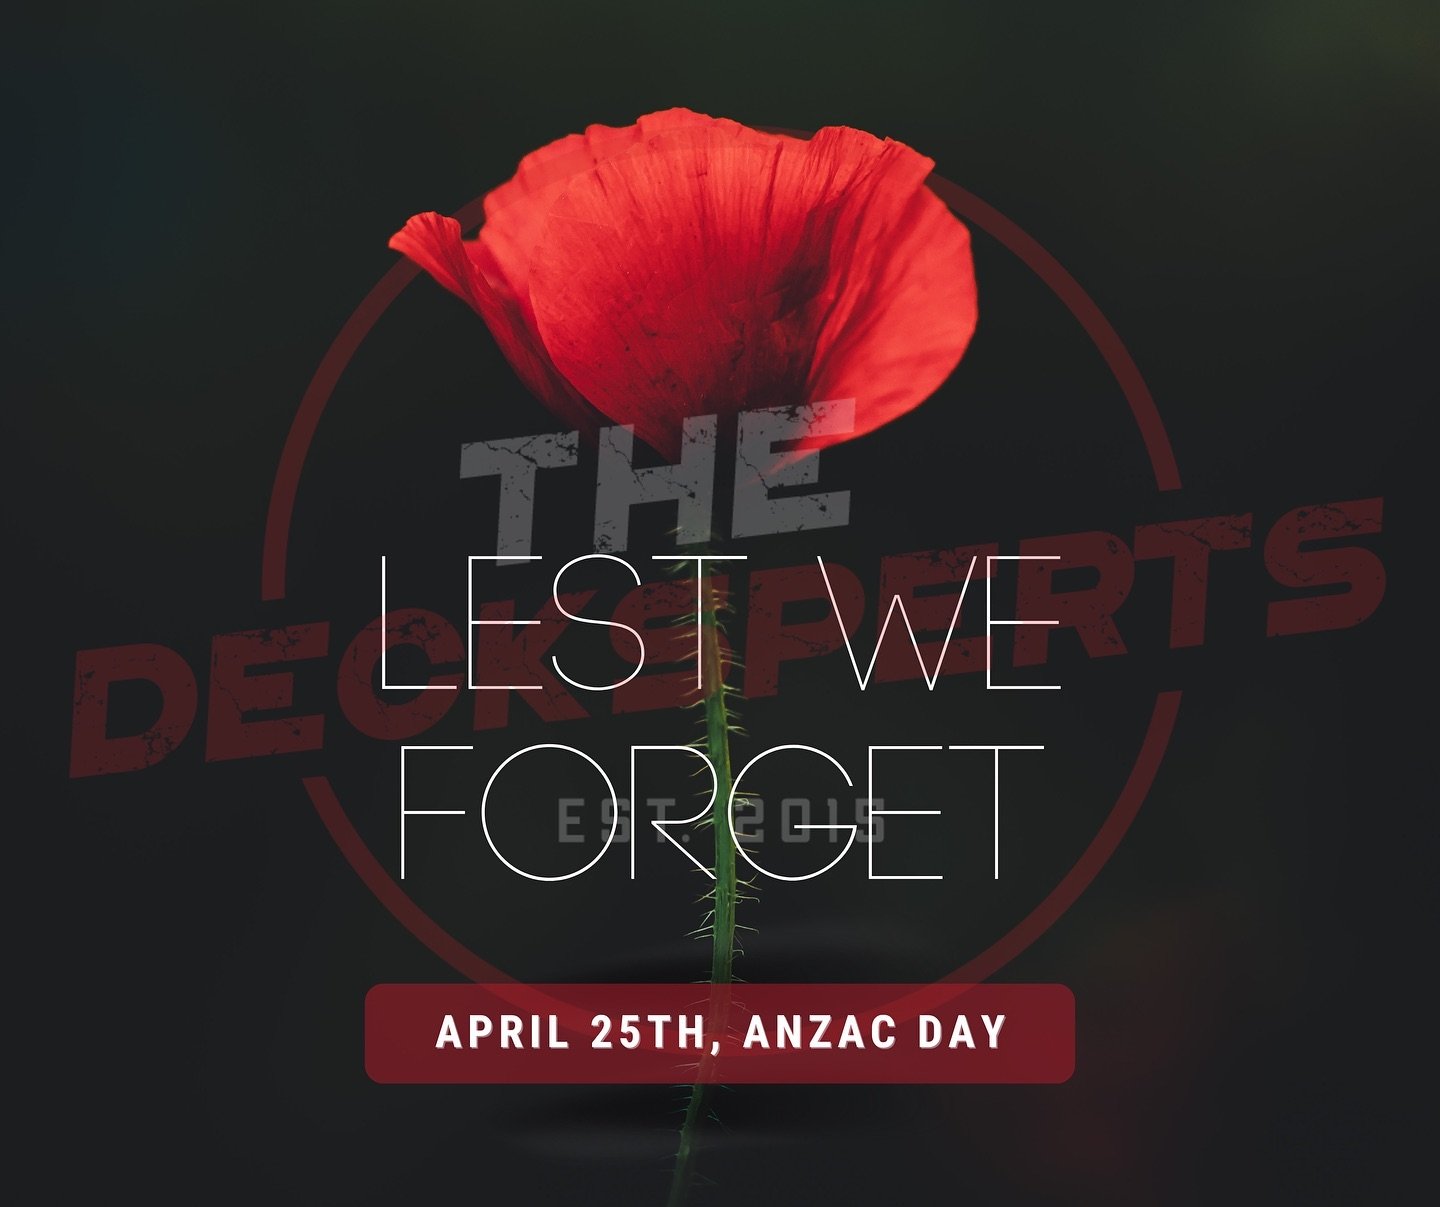 They shall grow not old, as we that are left grow old: 
Age shall not weary them, nor the years condemn. 
At the going down of the sun and in the morning 
We will remember them. 

#jclarkeconstructions #anzacday #wewillrememberthem